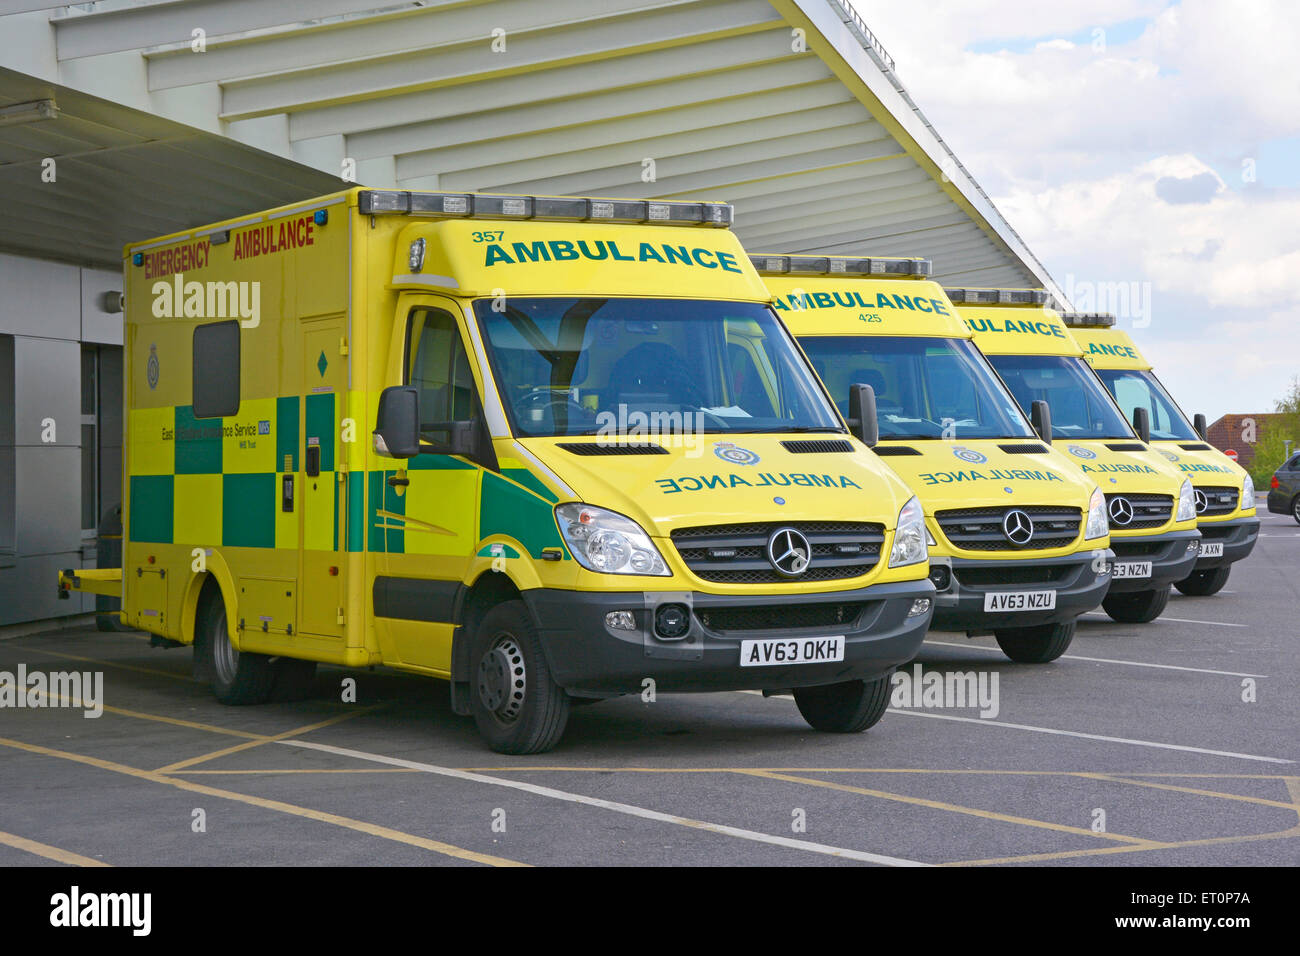 East Of England ambulance service Mercedes Benz NHS ambulances parked outside A&E hospital accident and emergency department Essex England UK Stock Photo